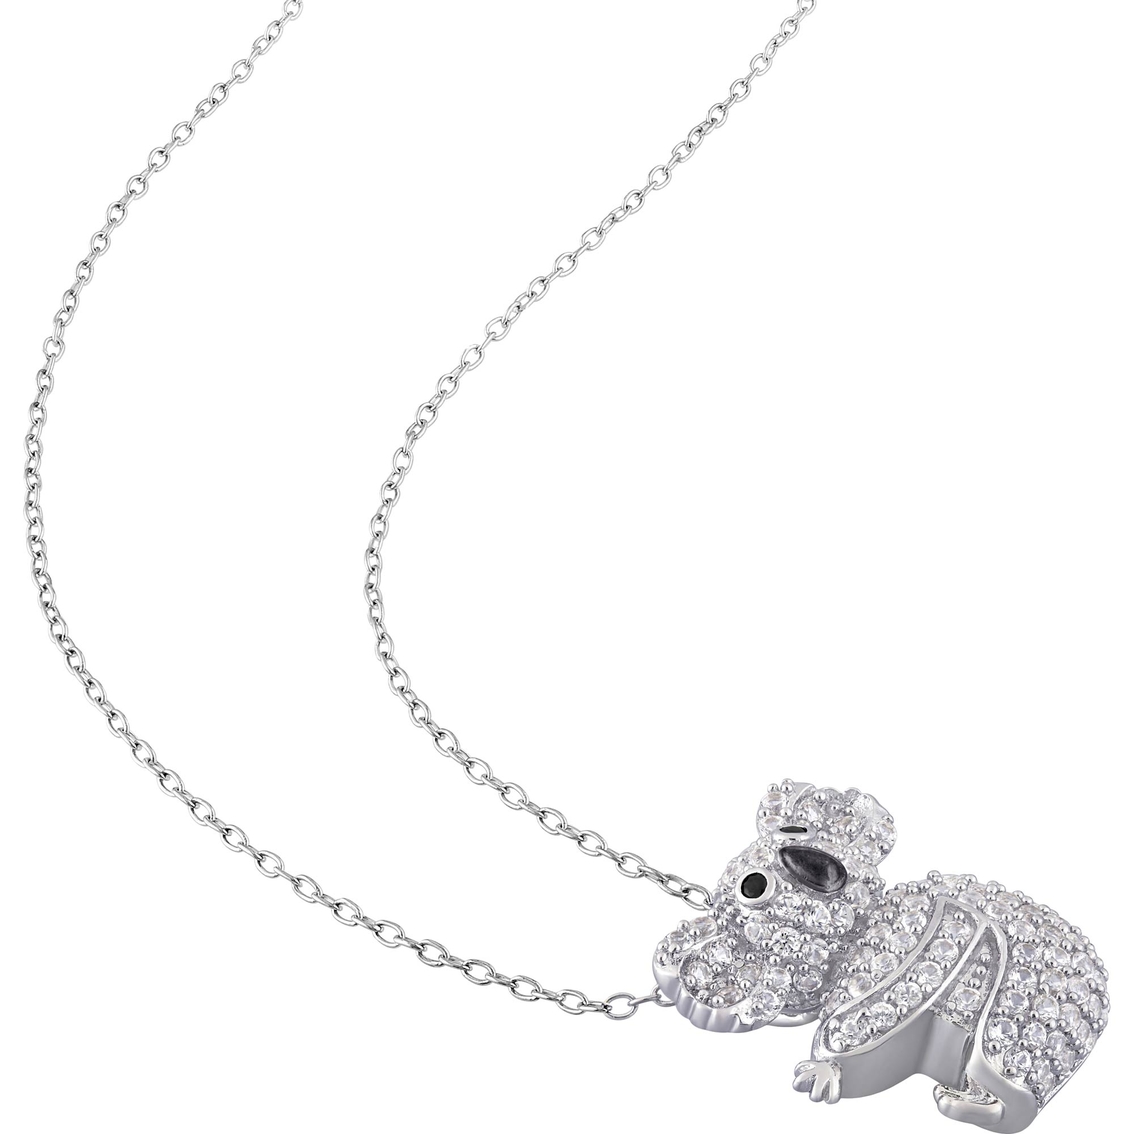 Sofia B. Sterling Silver Lab Created White Sapphire and Black Spinel Koala Necklace - Image 2 of 3